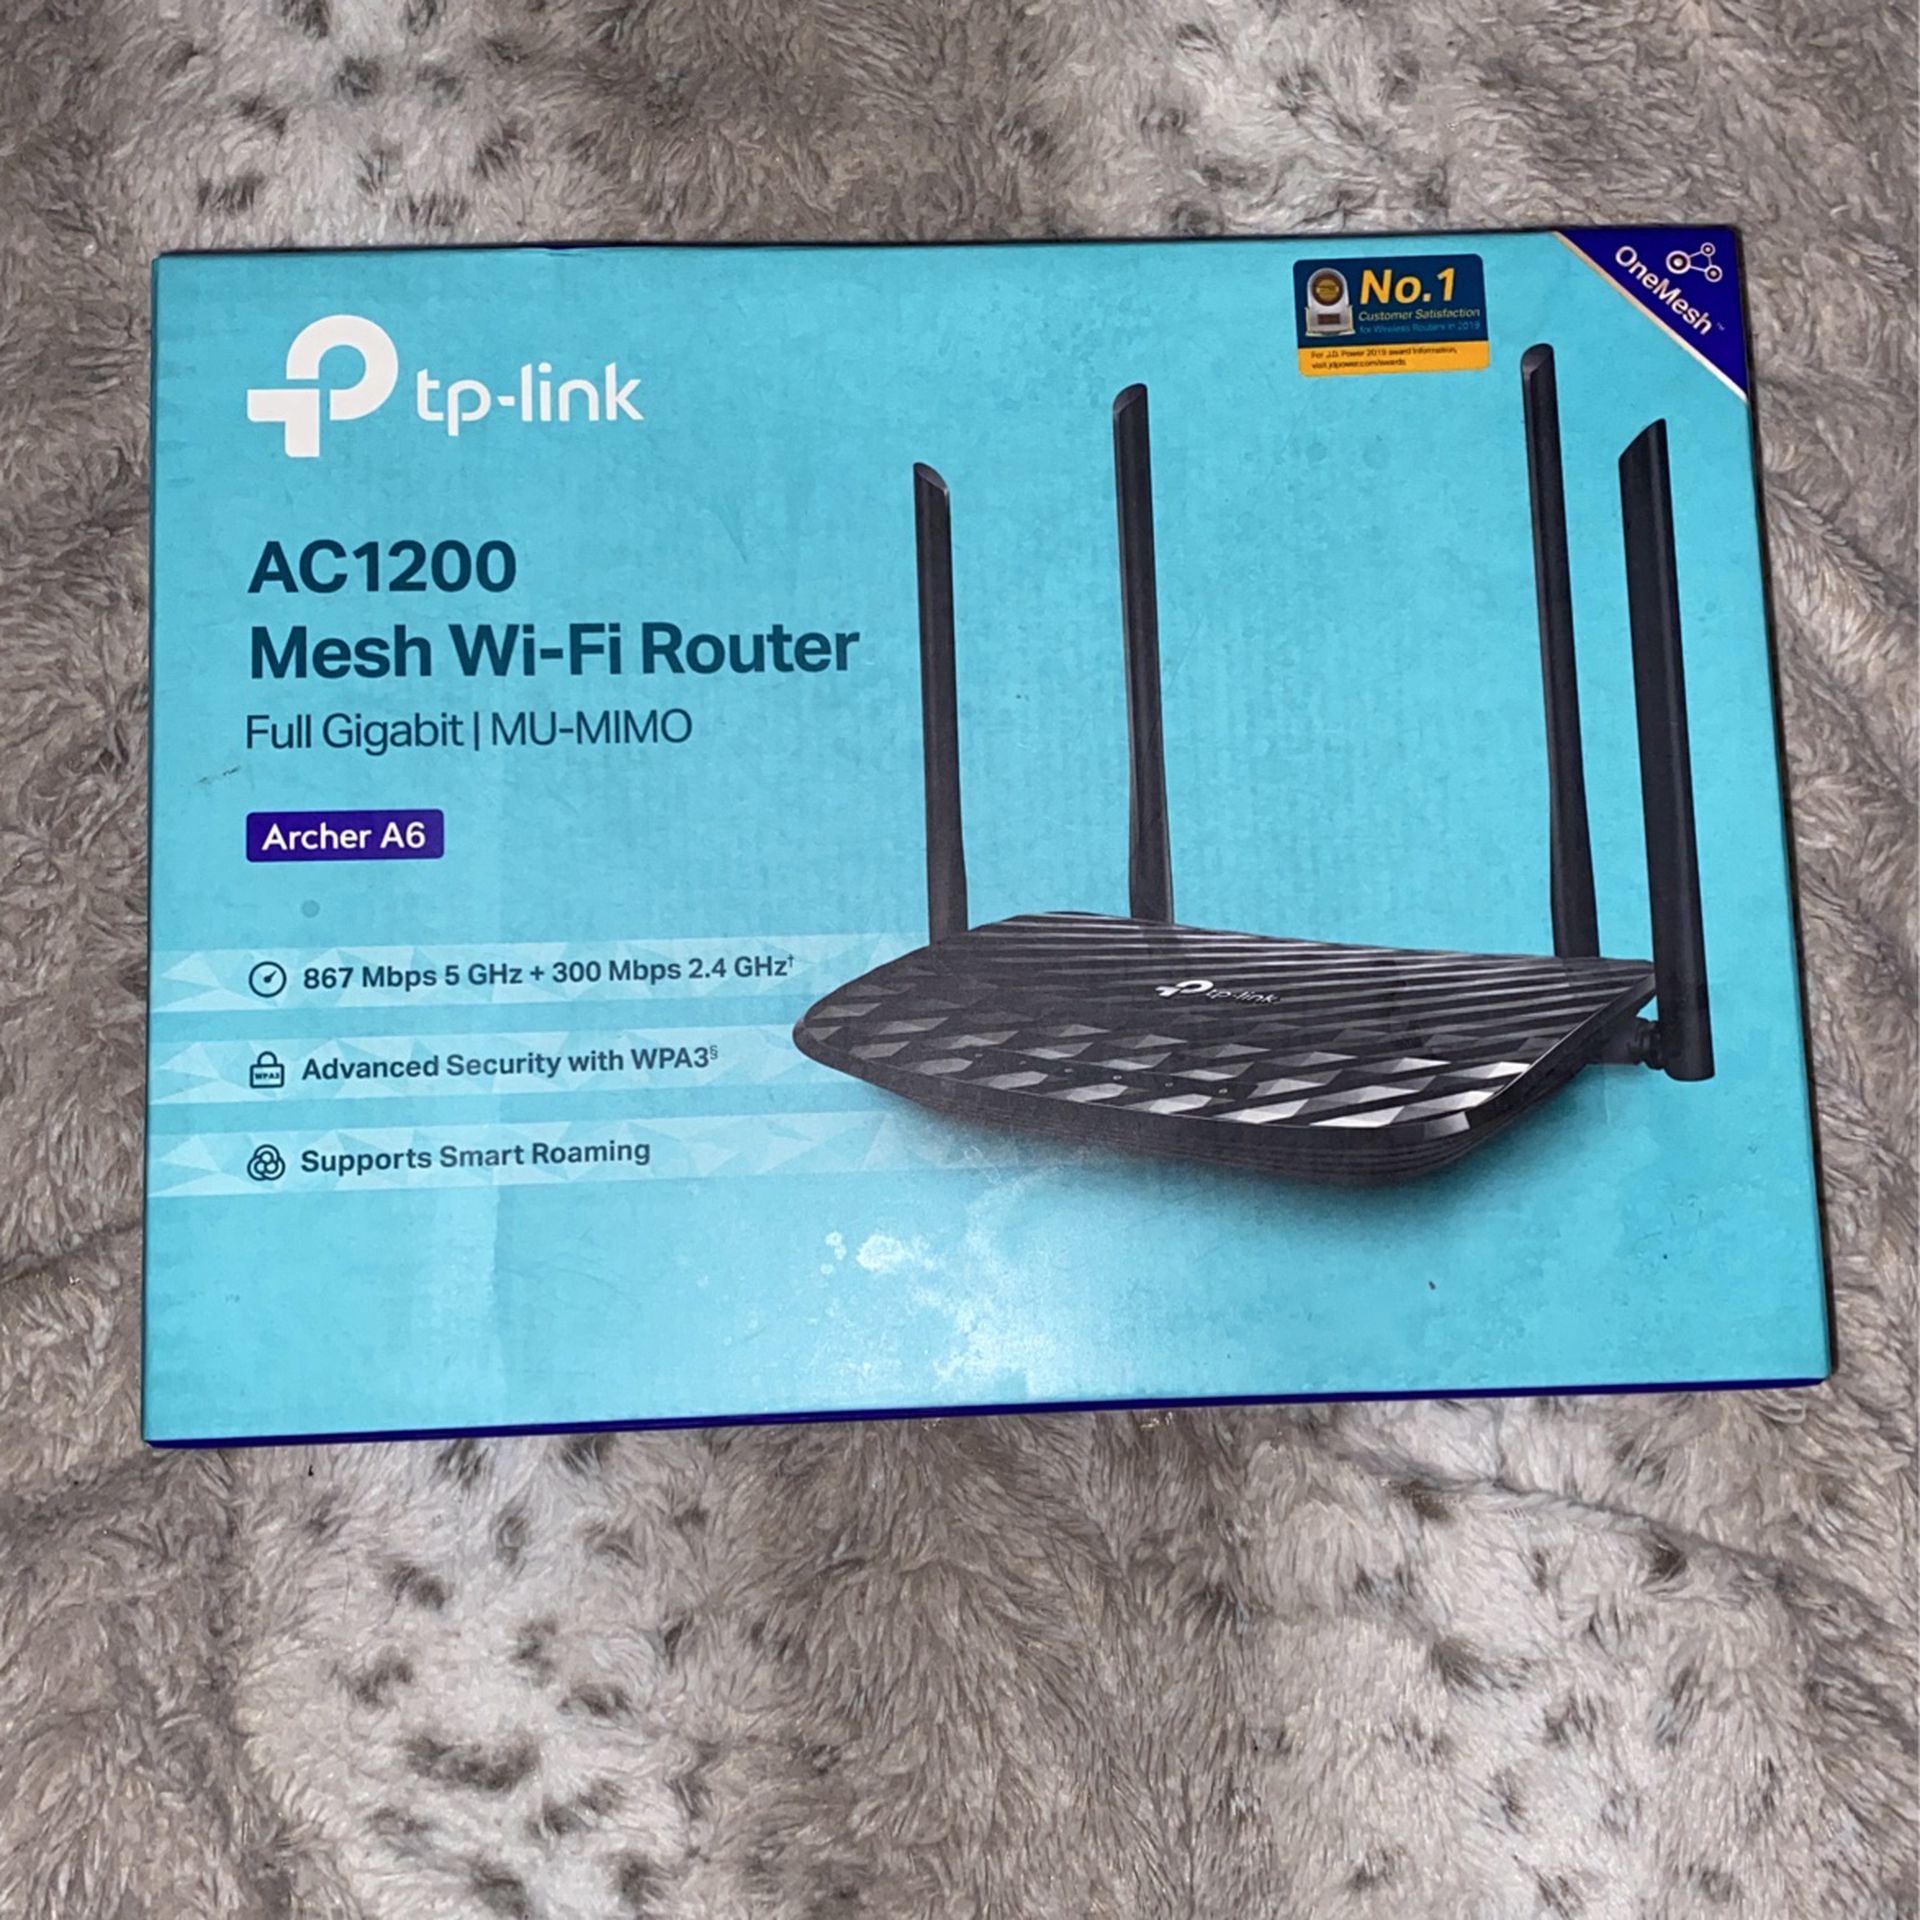 tp-link AC1200 Mesh WiFi Router